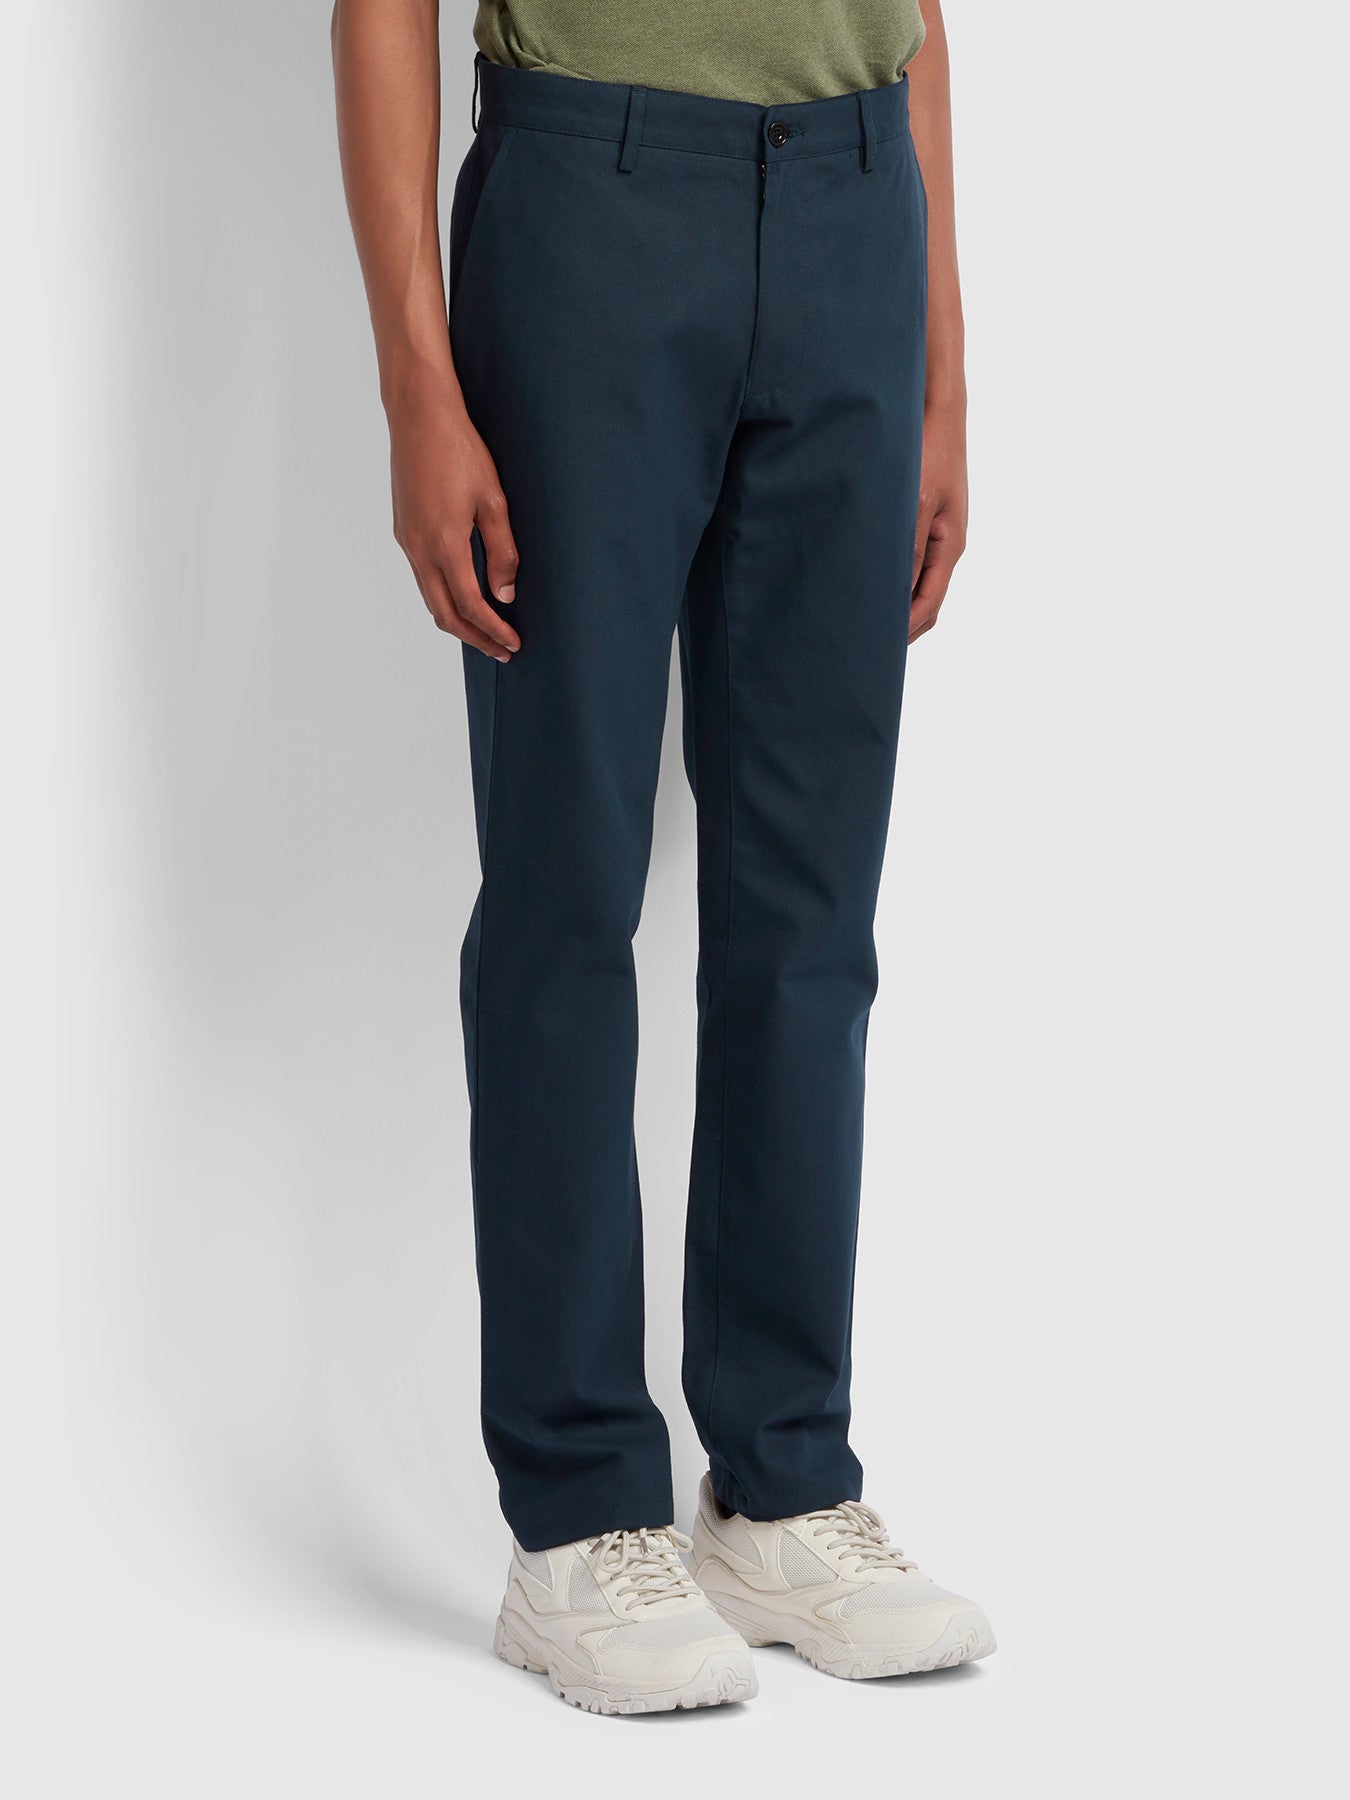 View Elm Regular Fit Cotton Hopsack Trousers In True Navy information